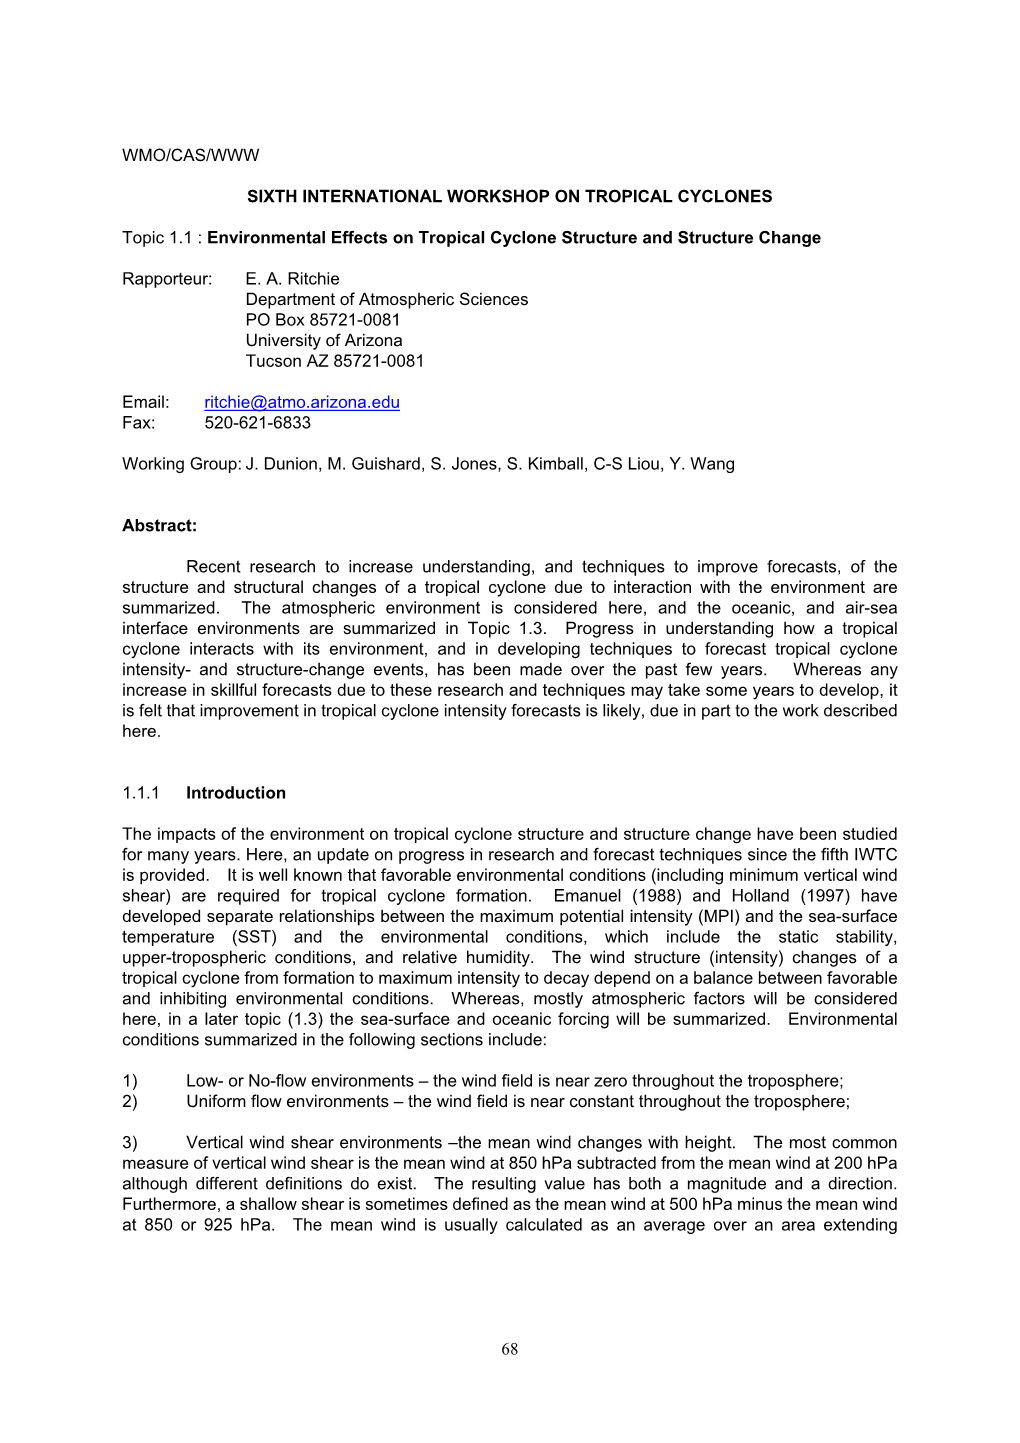 Environmental Effects on Tropical Cyclone Structure and Structure Change